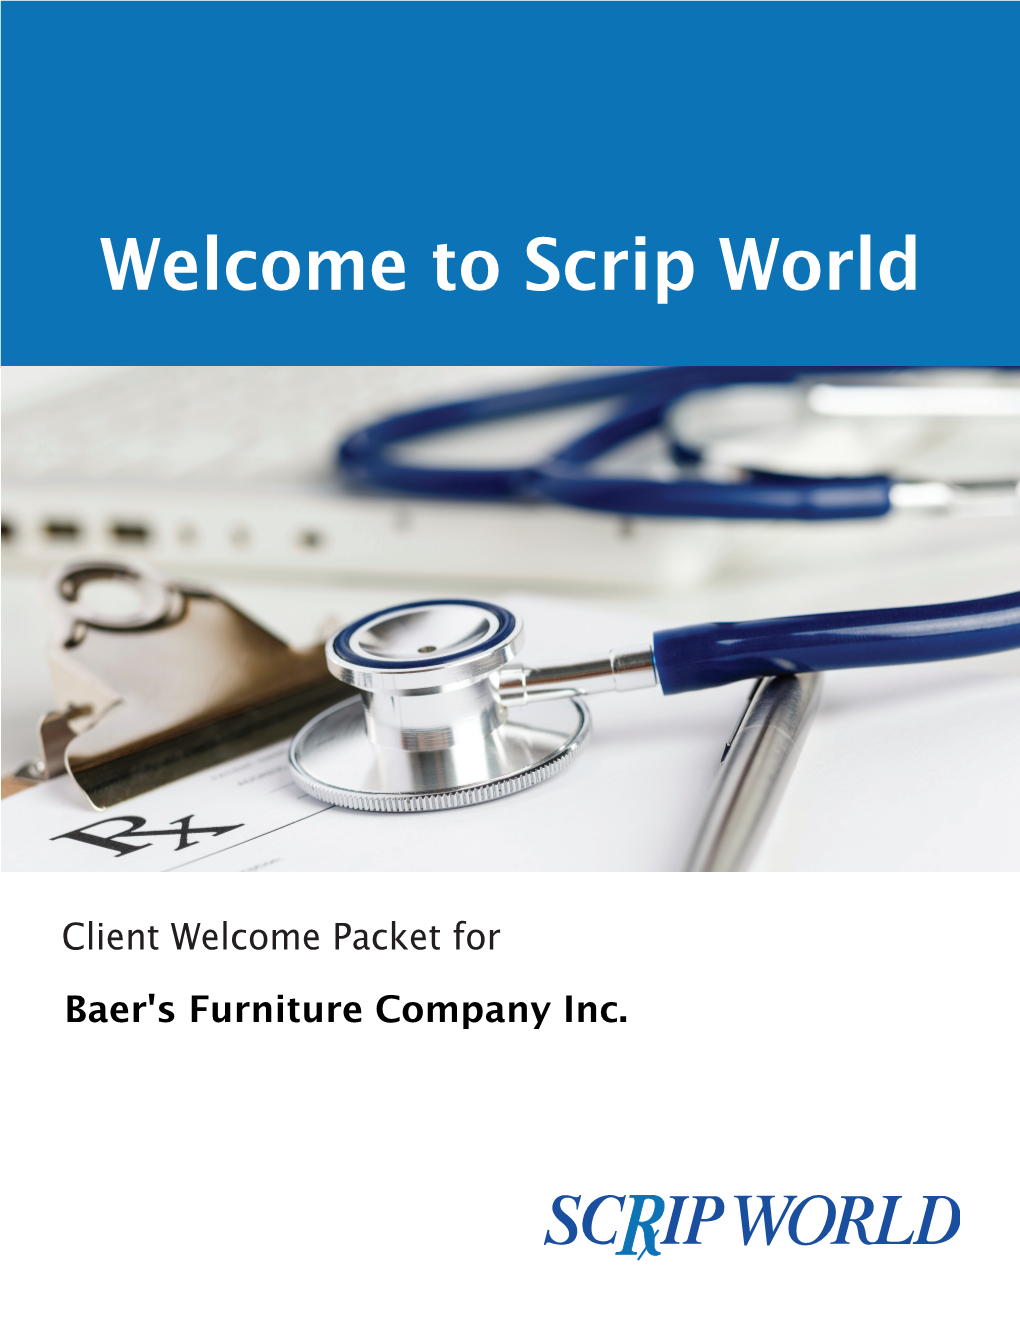 Welcome to Scrip World